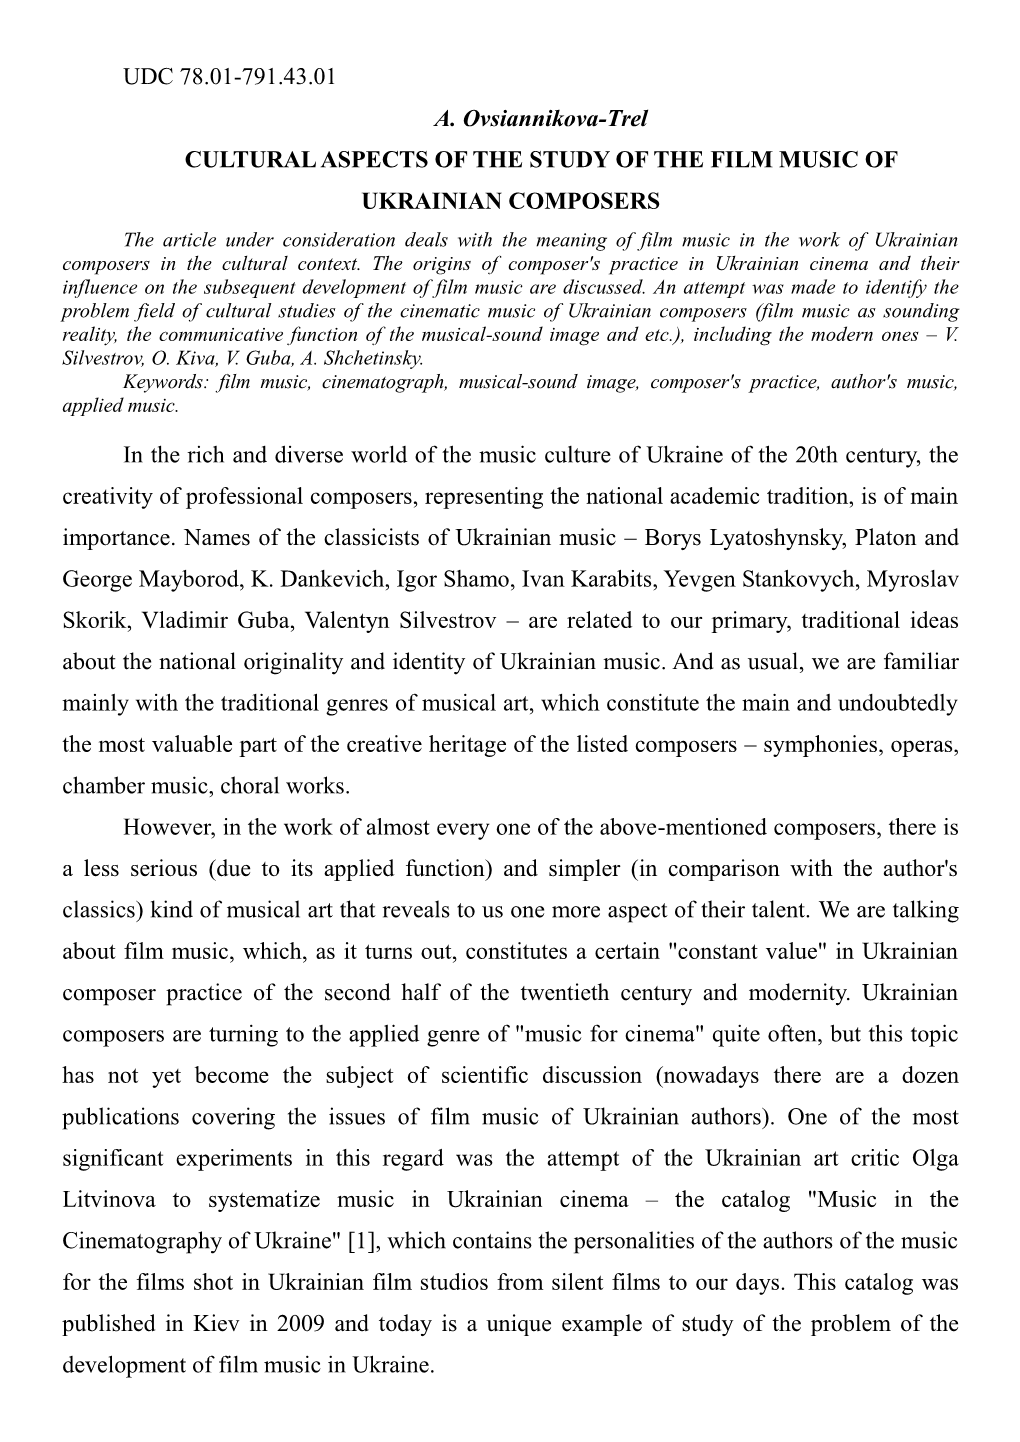 The Article Under Consideration Deals with the Meaning of Film Music in the Work of Ukrainian Composers in the Cultural Context